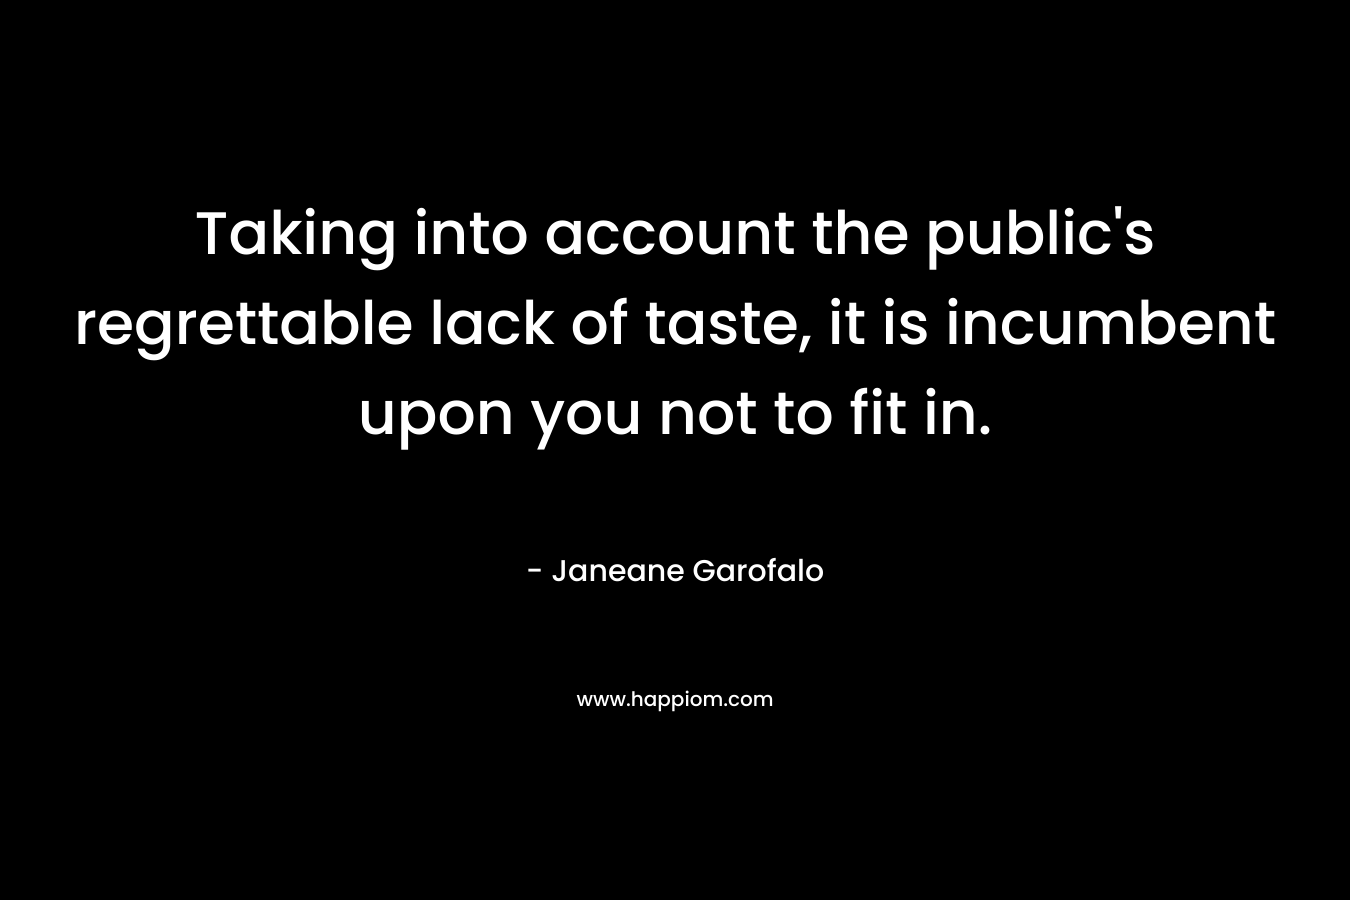 Taking into account the public’s regrettable lack of taste, it is incumbent upon you not to fit in. – Janeane Garofalo